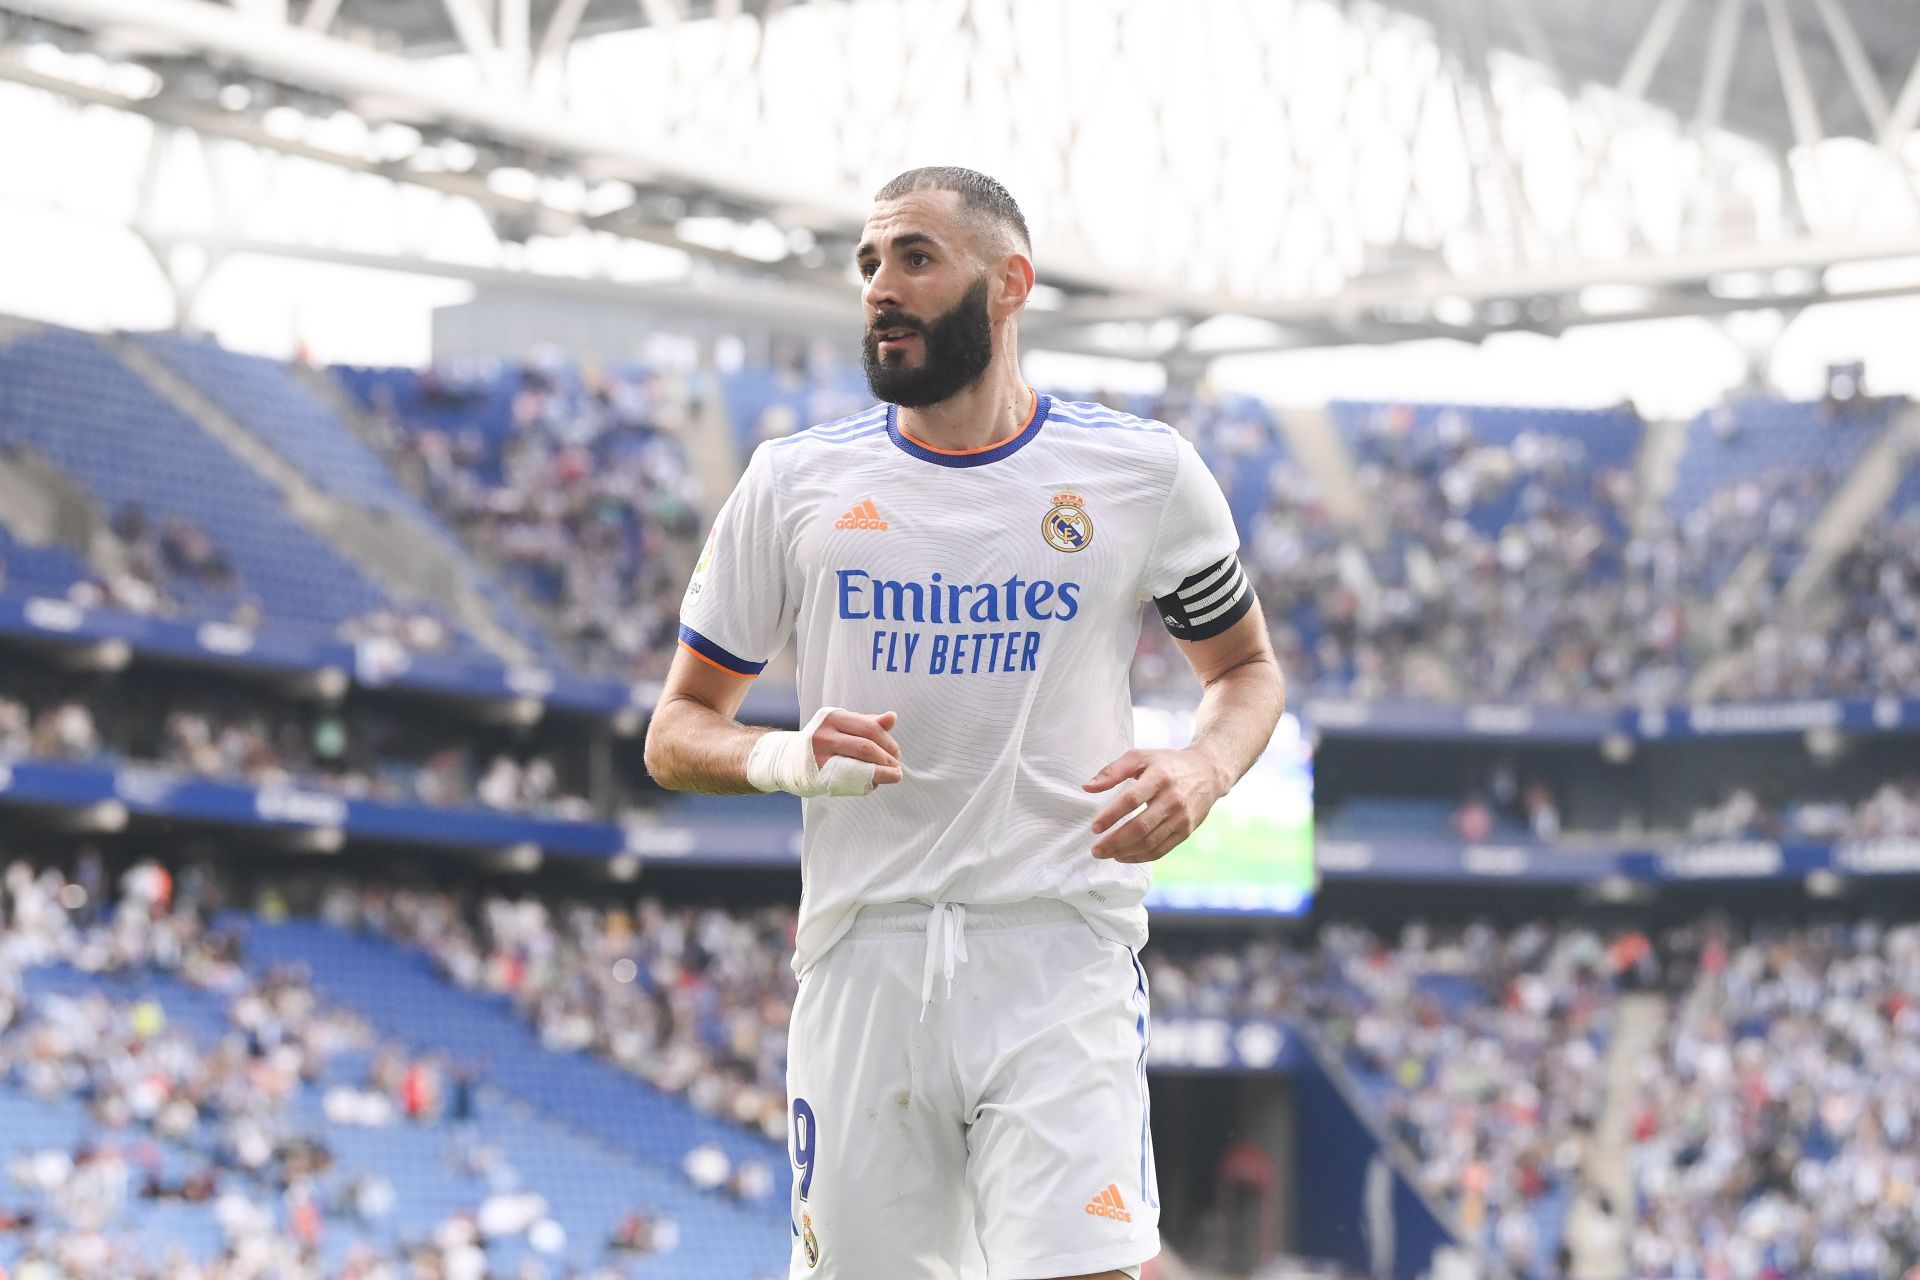 Karim Benzema has revealed his plans for life after leaving Real Madrid